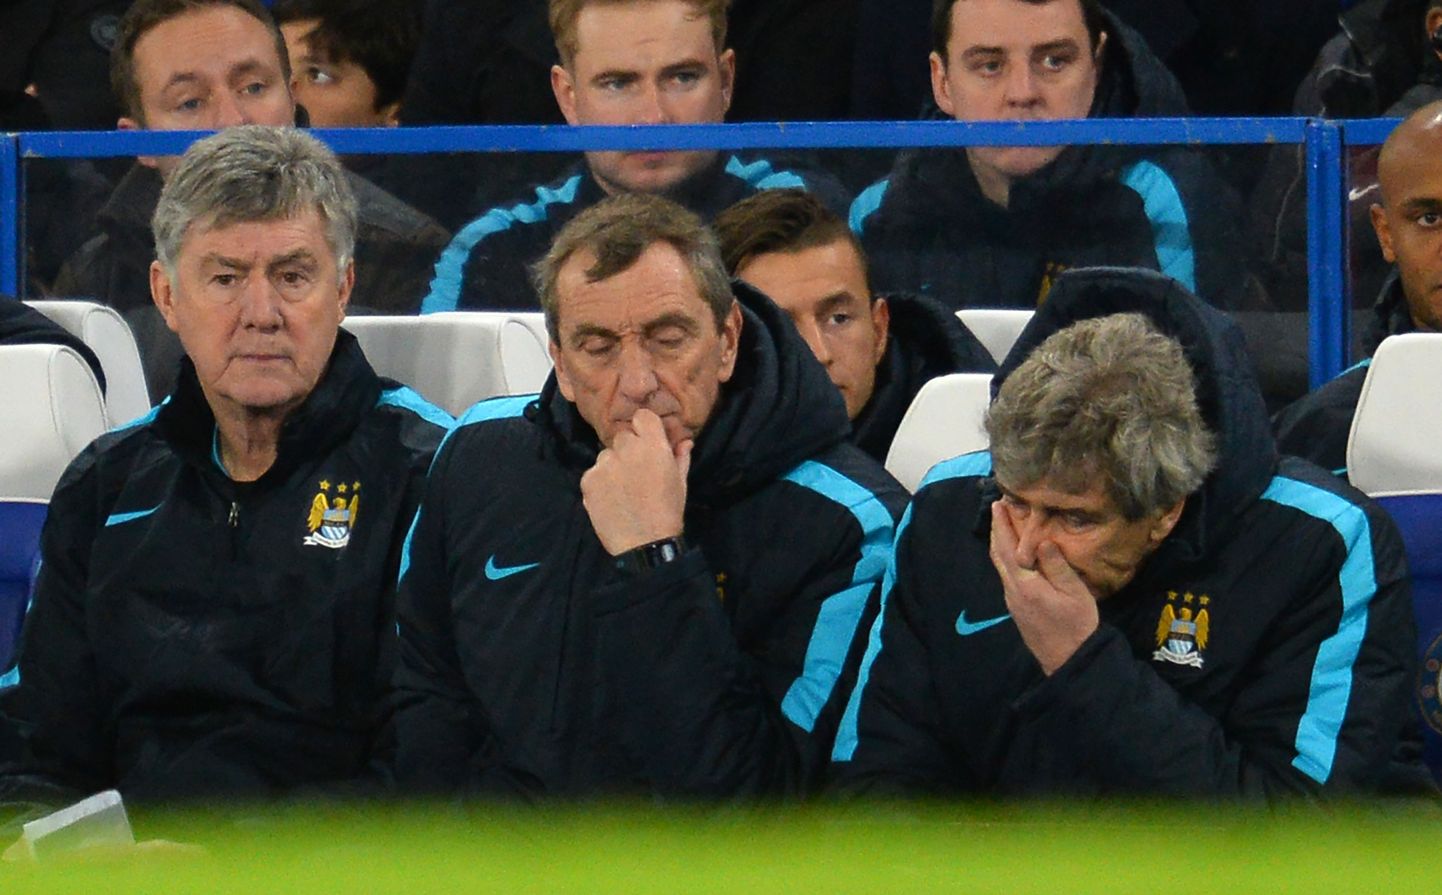 Manchester City's Chilean manager Manuel Pellegrini (R), Manchester City's assistant managers Ruben Cousillas (C) and Brian Kidd (L) gesture during the English FA Cup fifth round football match between Chelsea and Manchester City at Stamford Bridge in London on February 21, 2016. Chelsea won the game 5-1. / AFP / GLYN KIRK / RESTRICTED TO EDITORIAL USE. No use with unauthorized audio, video, data, fixture lists, club/league logos or 'live' services. Online in-match use limited to 75 images, no video emulation. No use in betting, games or single club/league/player publications.  /